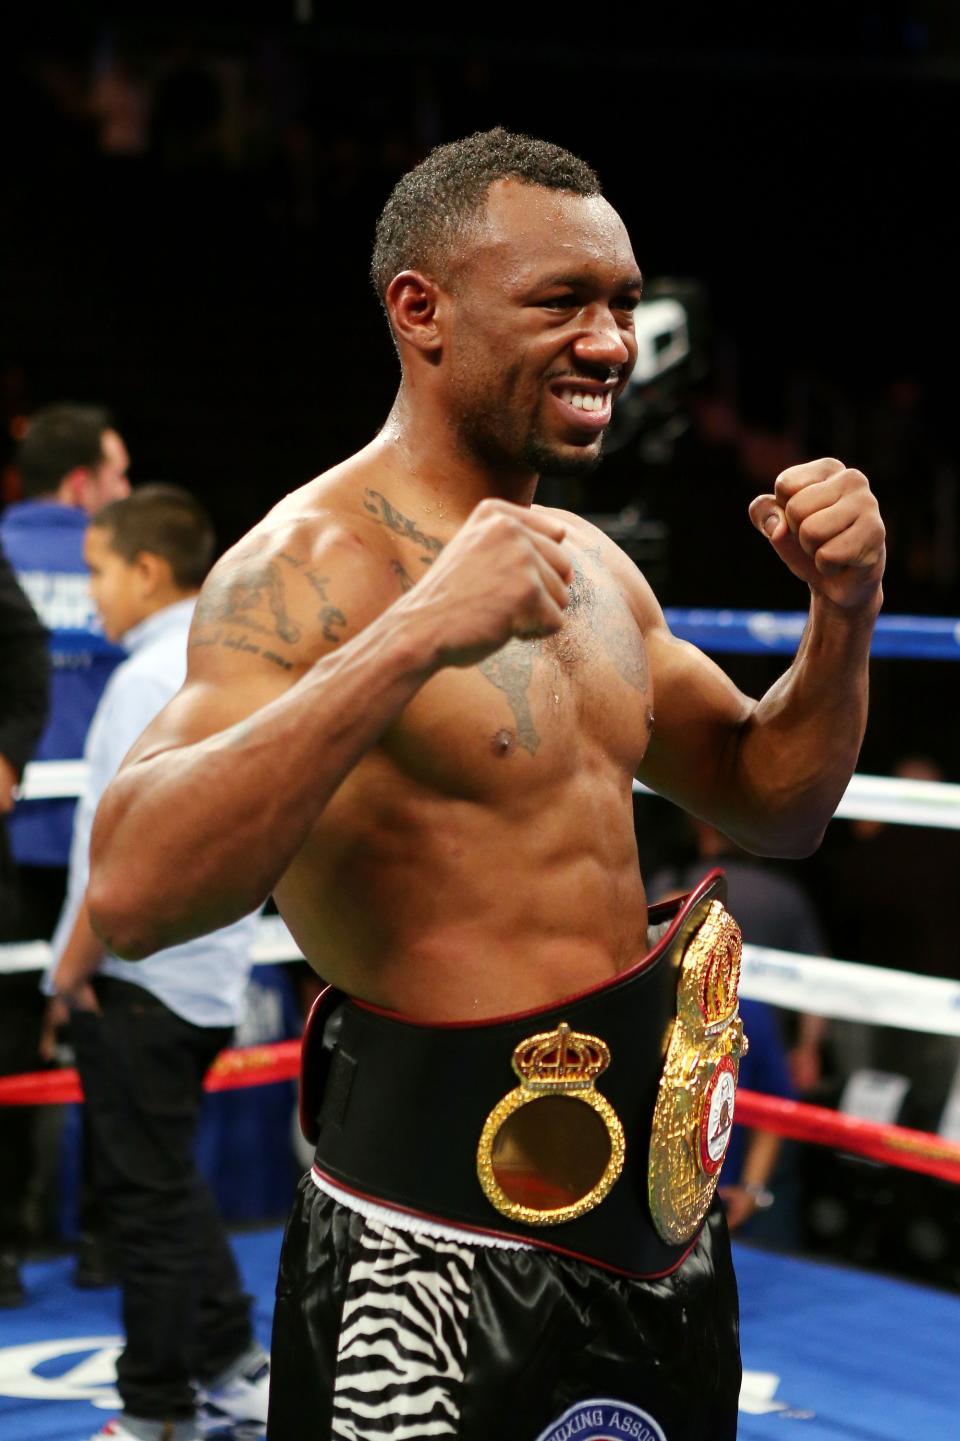 NEW YORK, NY - DECEMBER 01: Austin Trout celebrates with the belt after defeating Miguel Cotto to retain his WBA Super Welterweight Championship title at Madison Square Garden on December 1, 2012 in New York City. (Photo by Elsa/Getty Images)